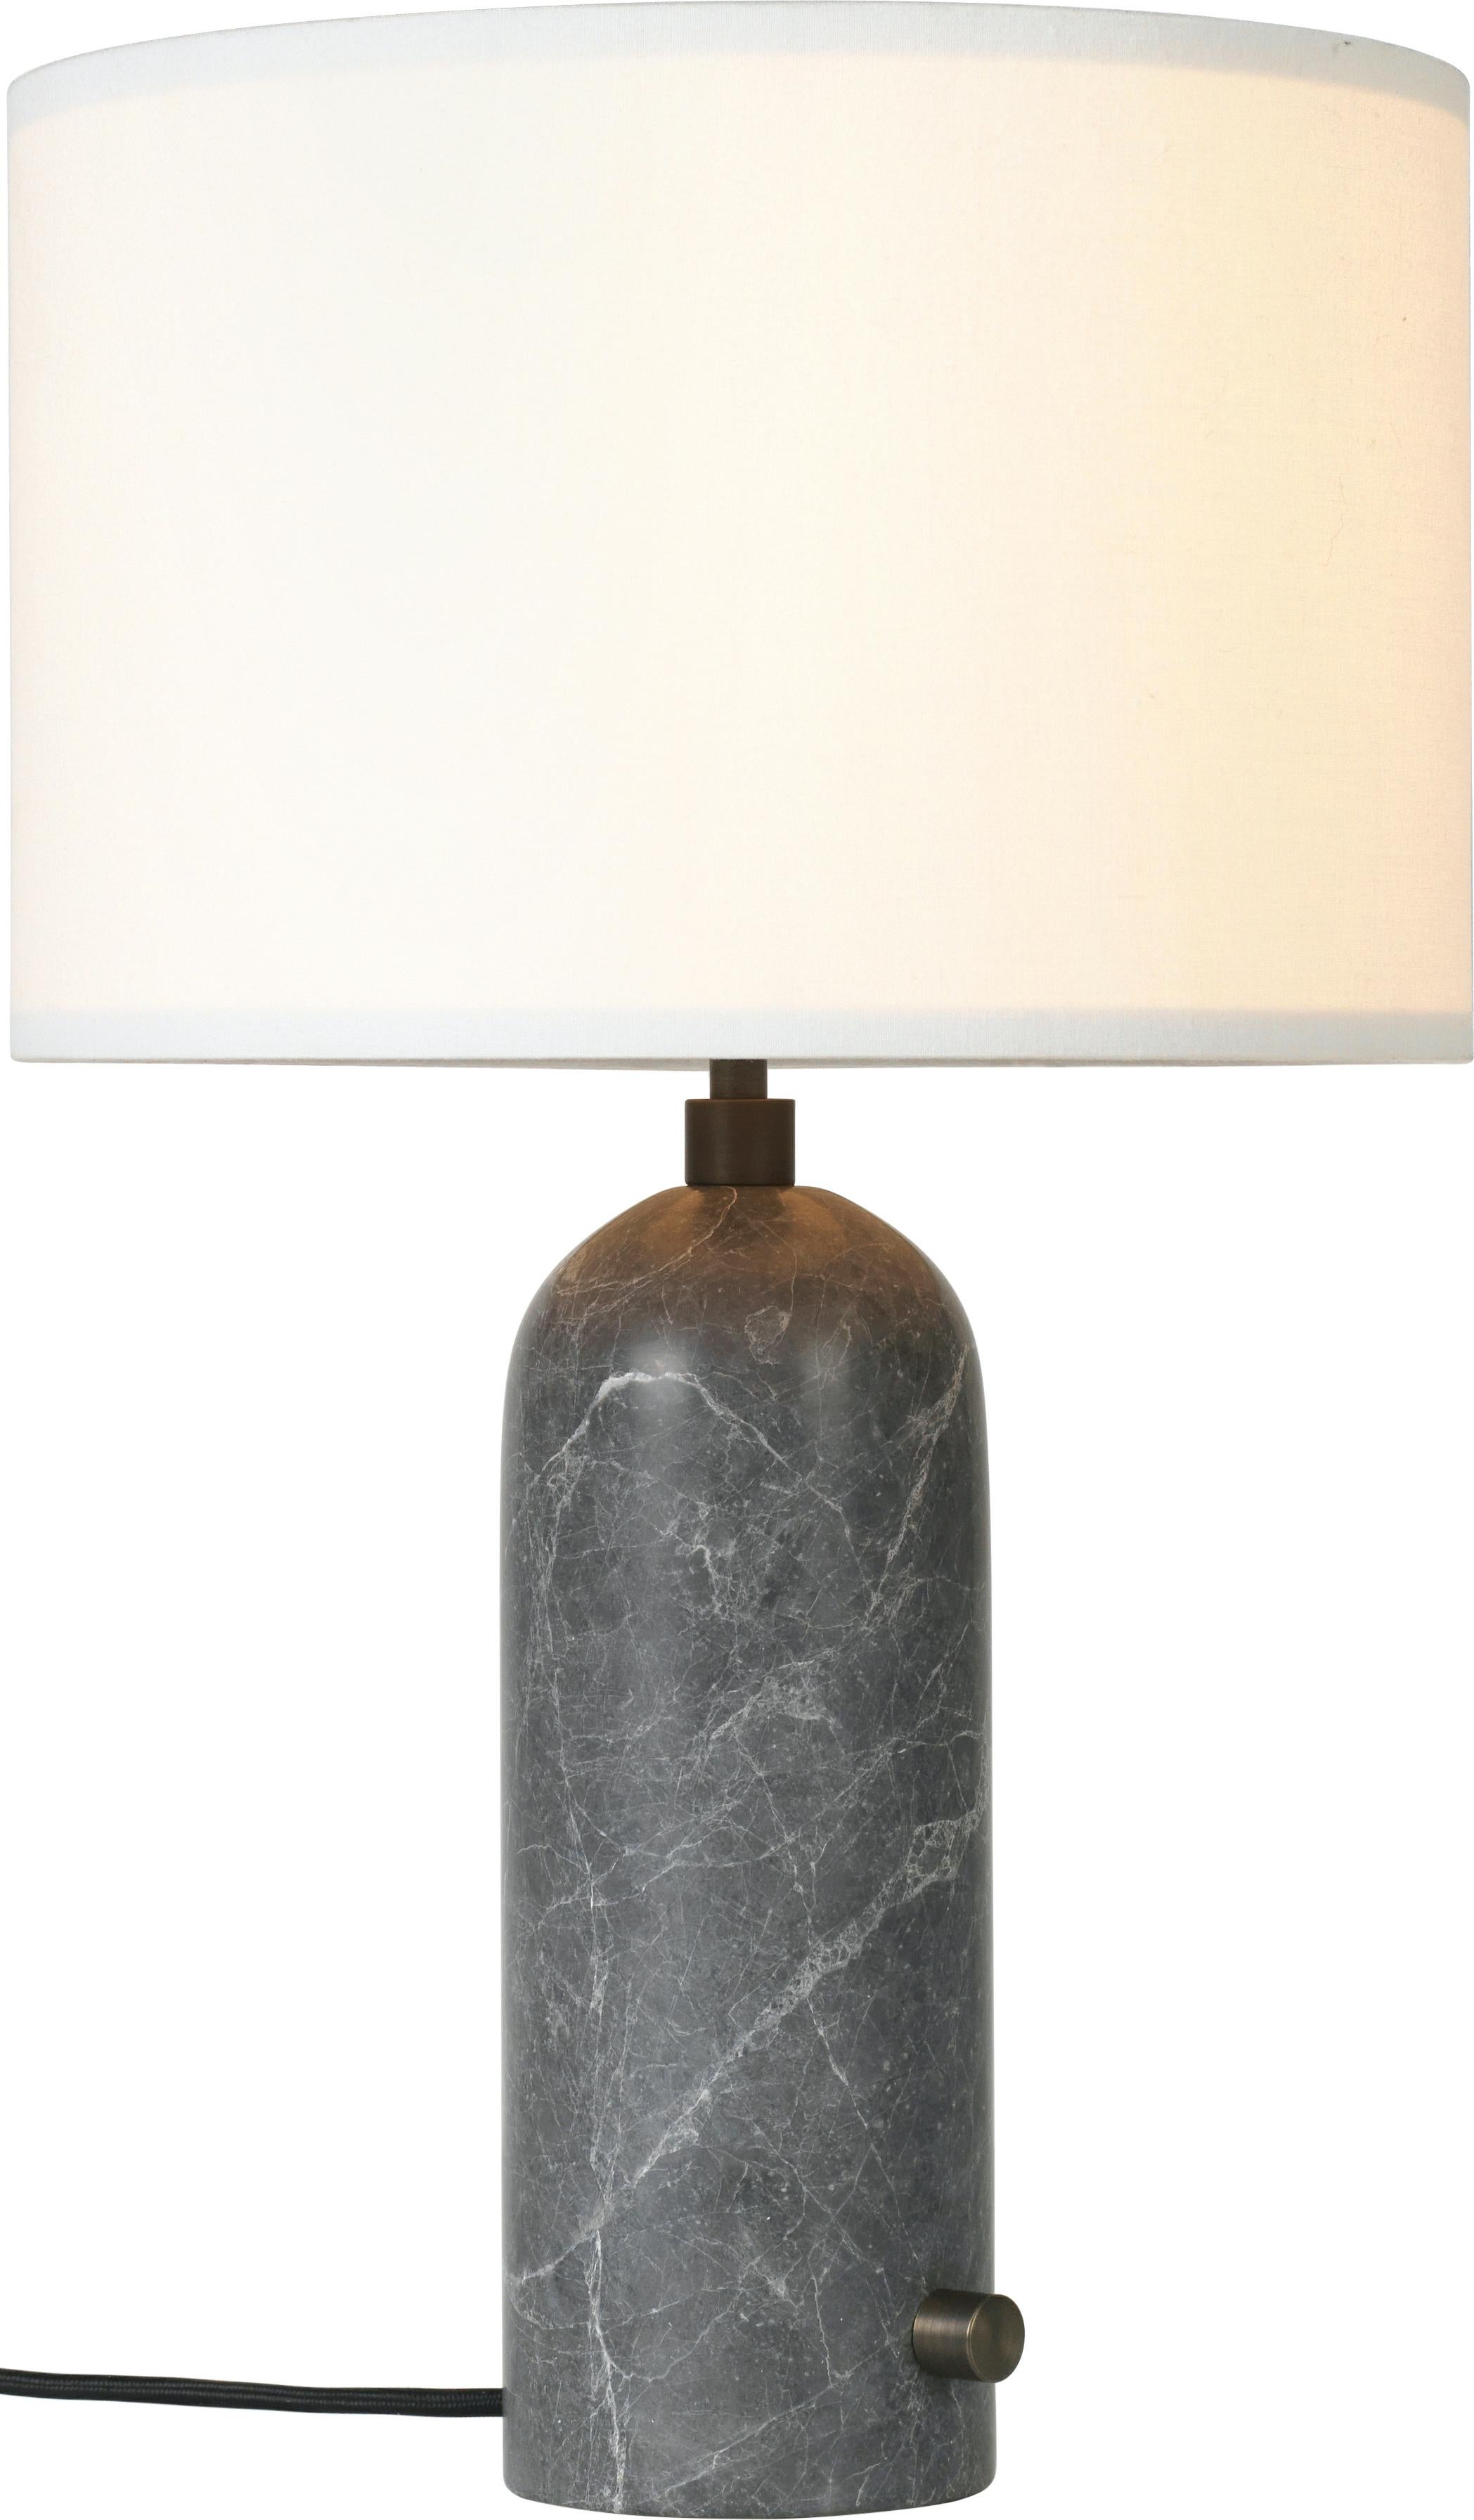 Large 'Gravity' Blackened Steel Table Lamp by Space Copenhagen for Gubi For Sale 4